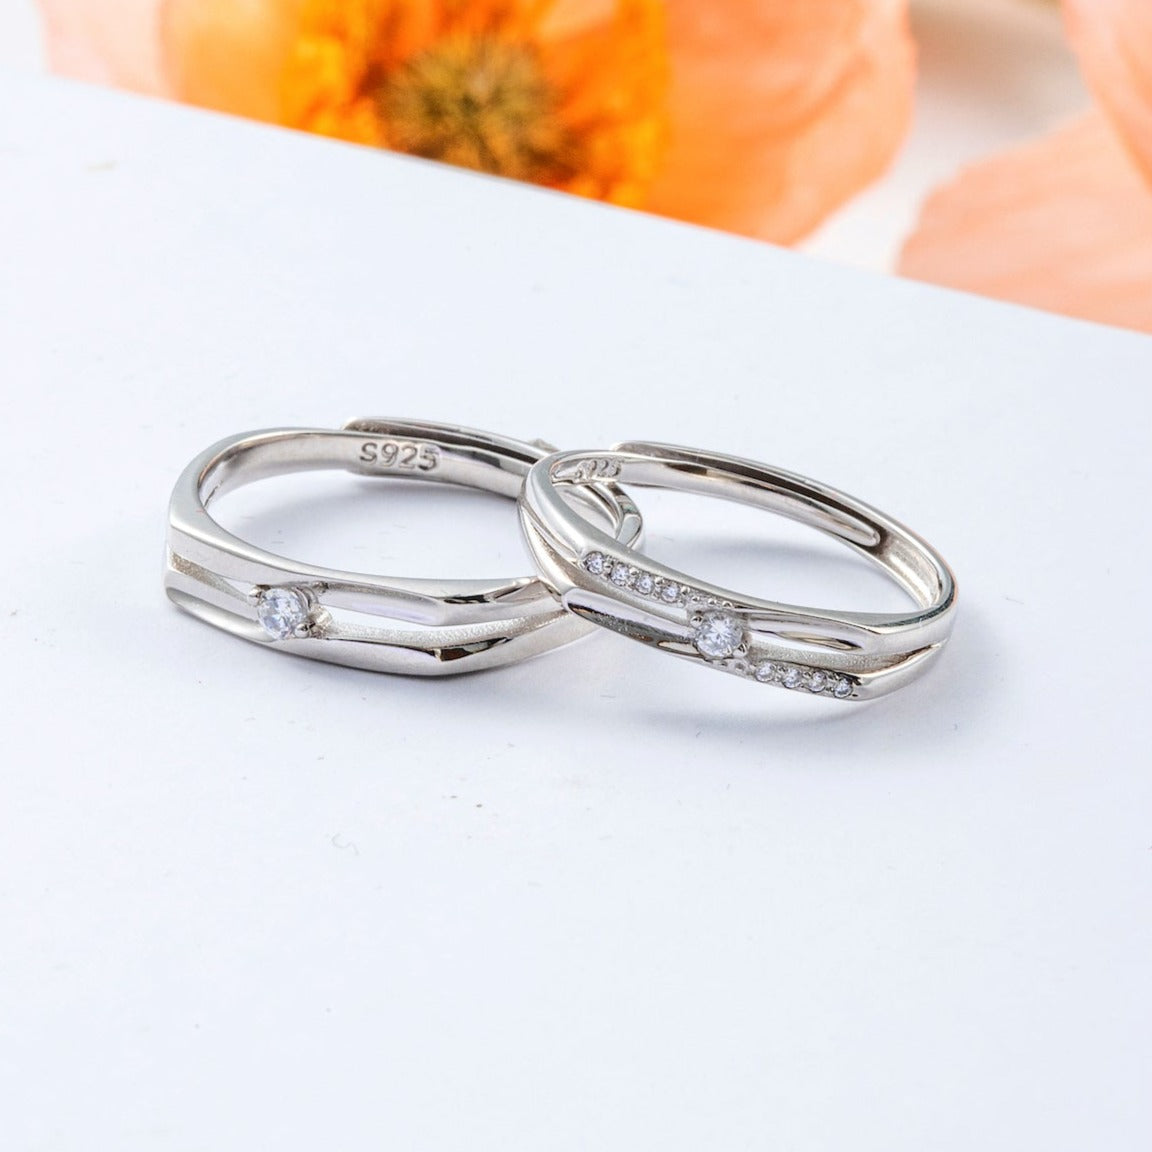 Pure 925 Silver Couple Bands